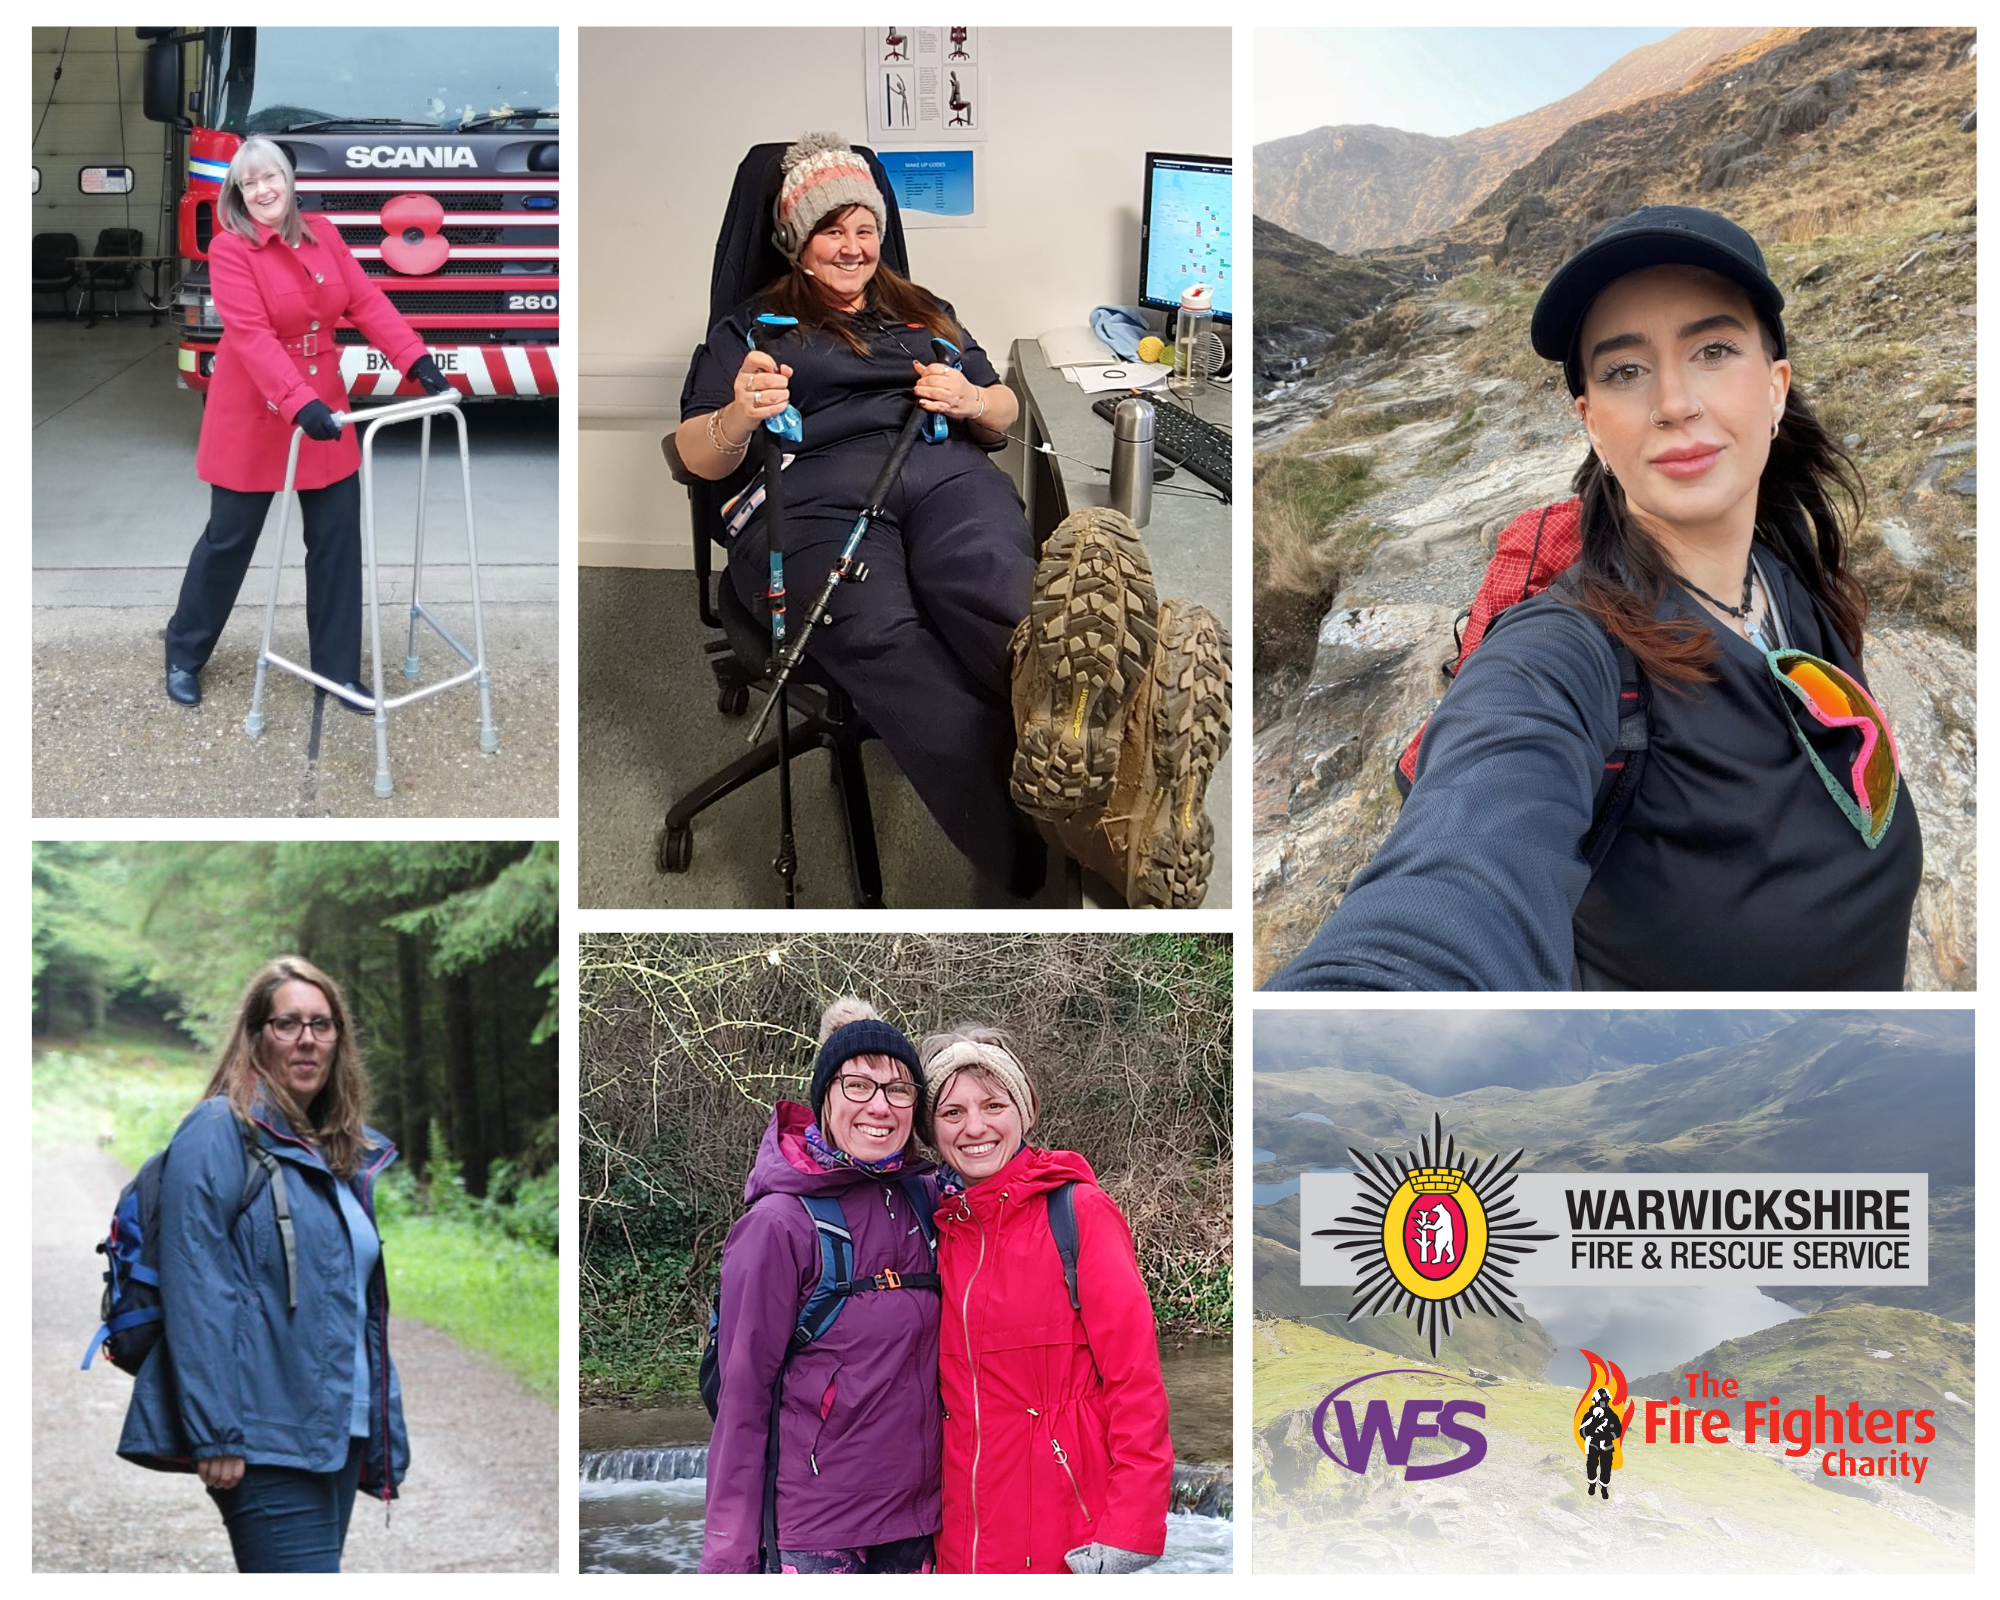 A collage of women hiking or at work at WFRS